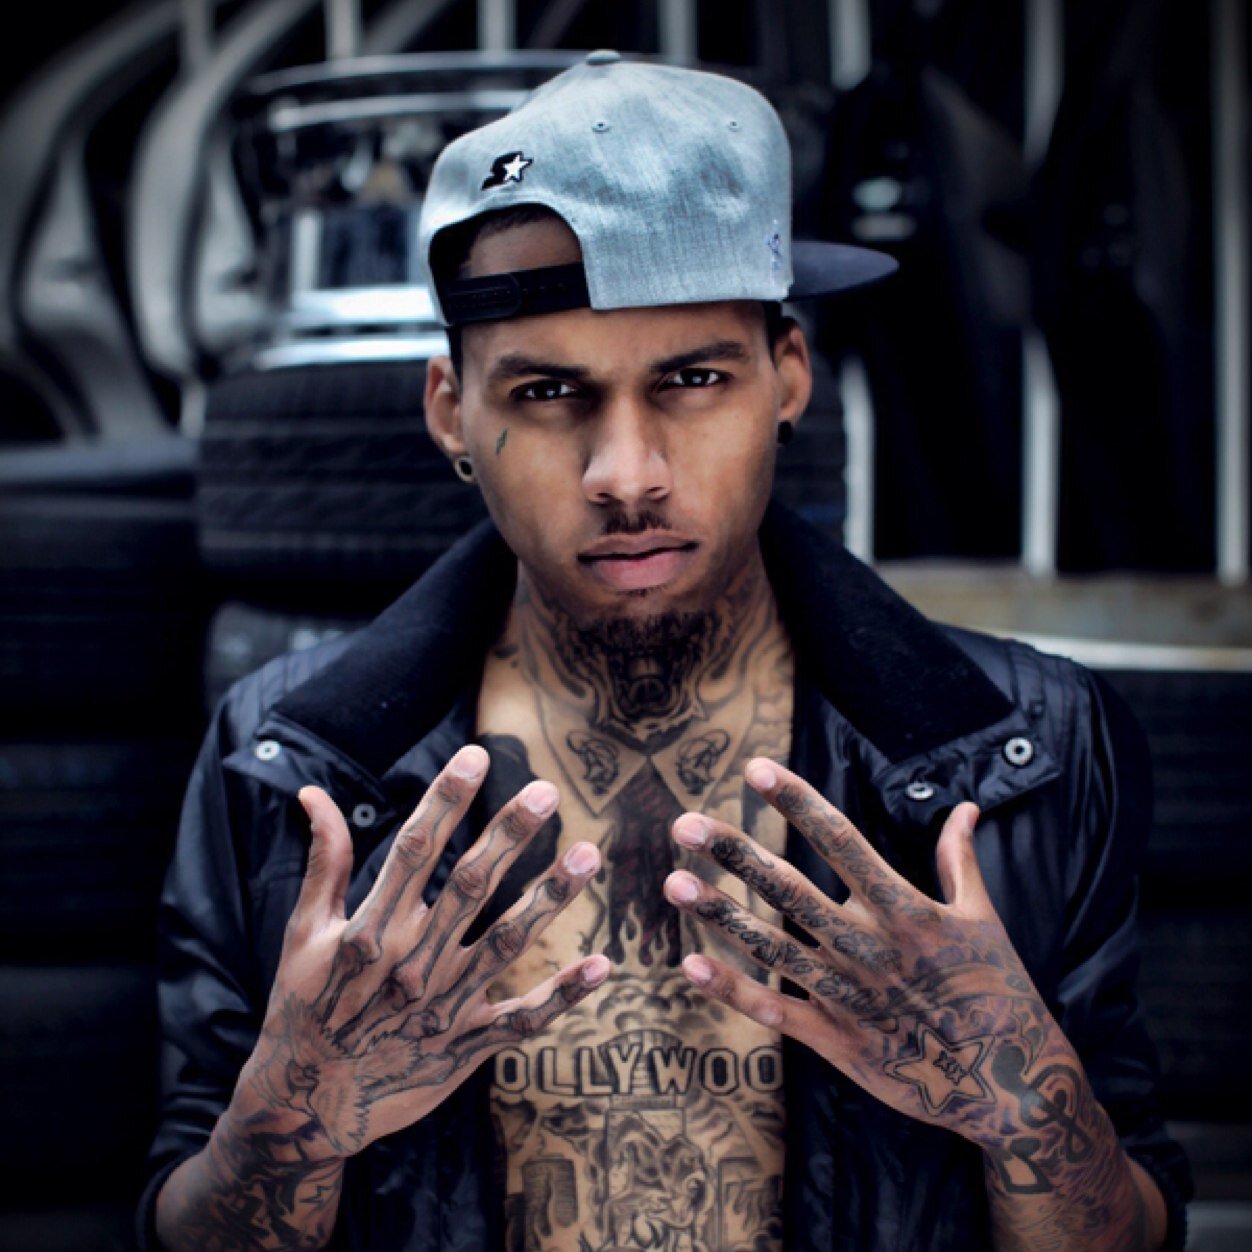 Hiram Spring Fest ft. Kid Ink 
May 3rd 2014 
Tickets available @ http://t.co/zfmGB8SfCn